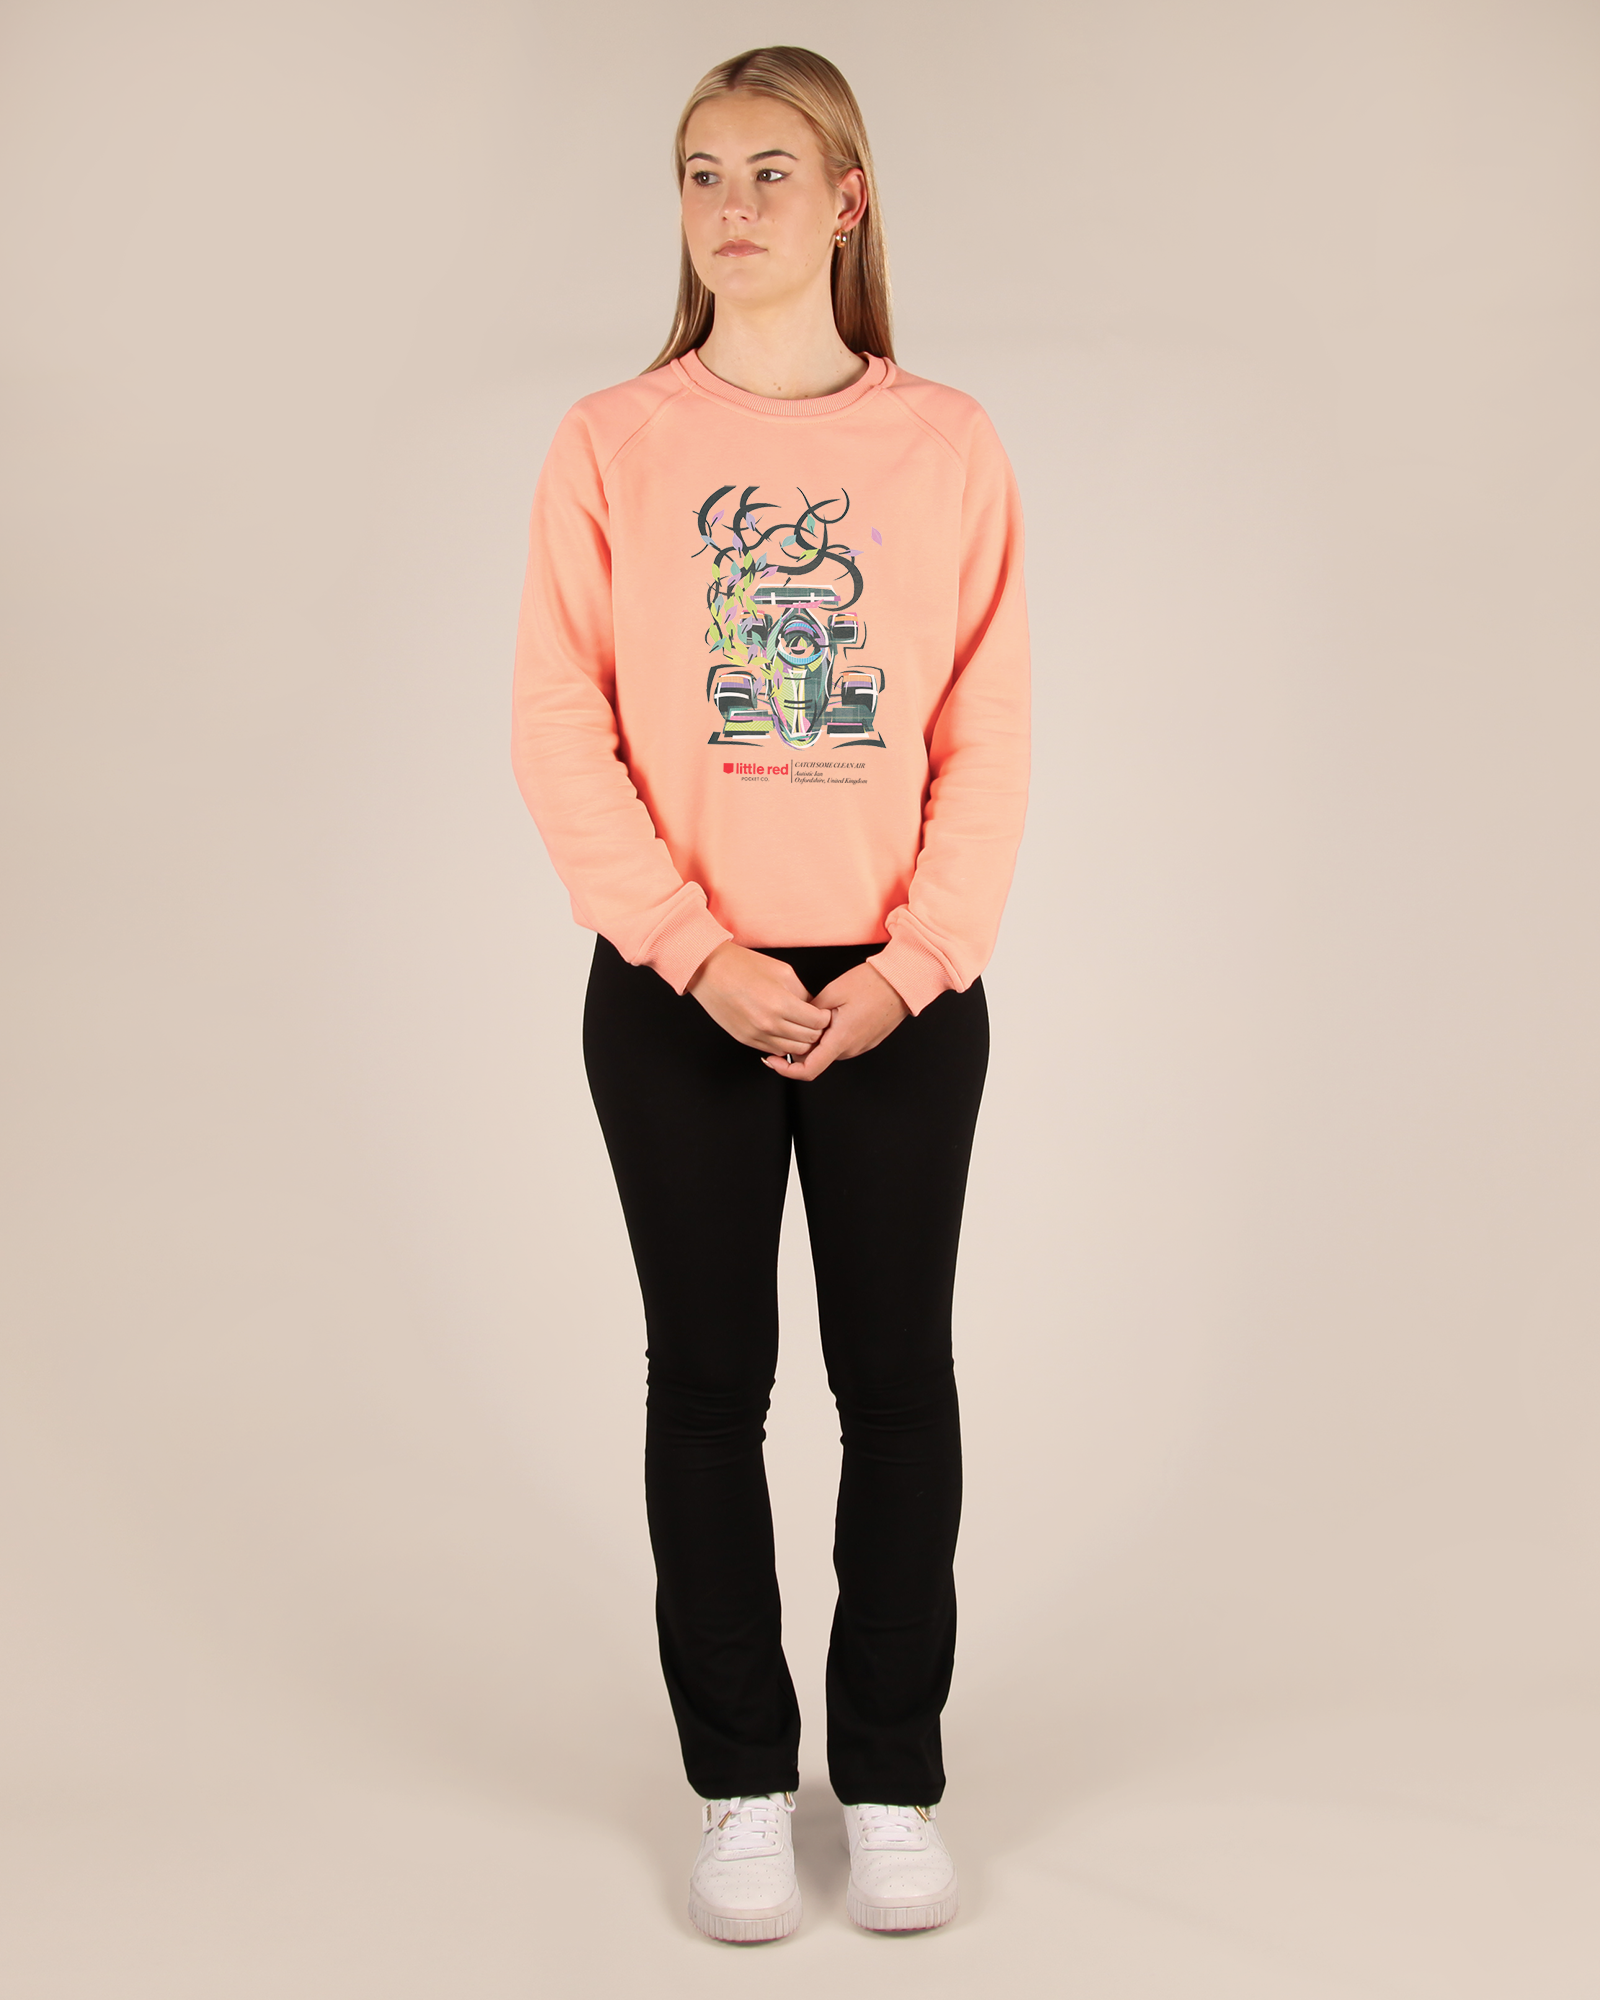 "Catch Some Clean Air" Female Crewneck Sweater - Apricot